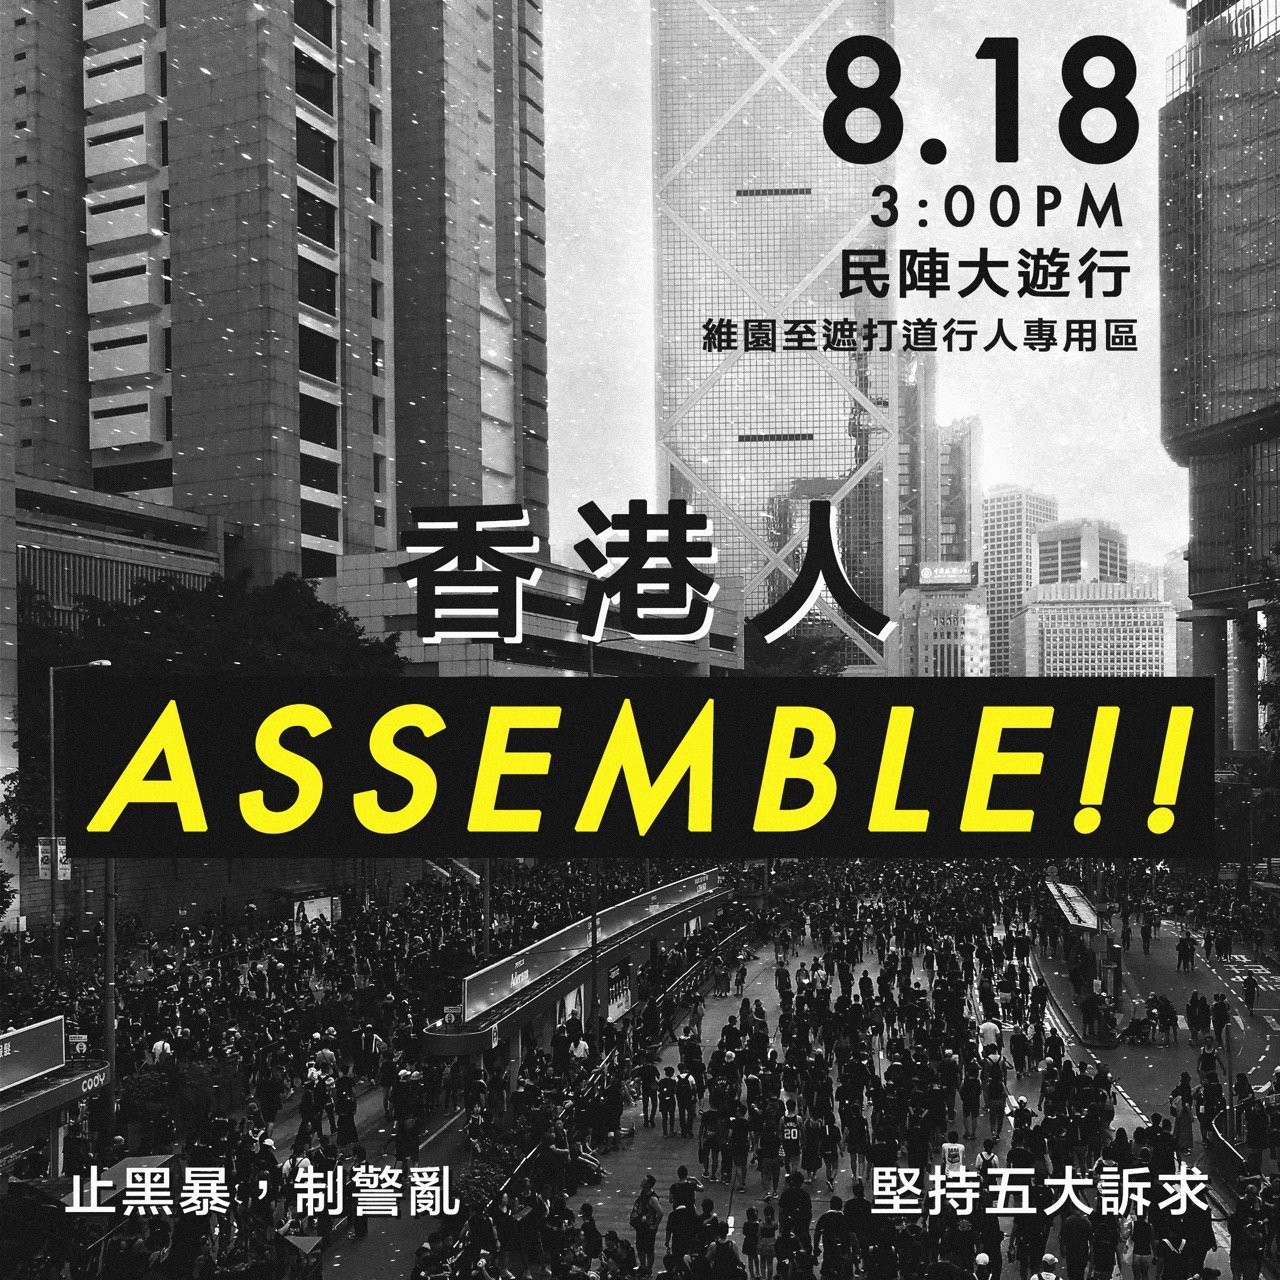 A poster advertising a march on Aug 18 at 3 PM, from Victoria Park to Charter Road. The main slogan reads, Hong Kongers, ASSEMBLE!! as well as "Stop triad violence, limit police chaos" and "Support the Five Demands".